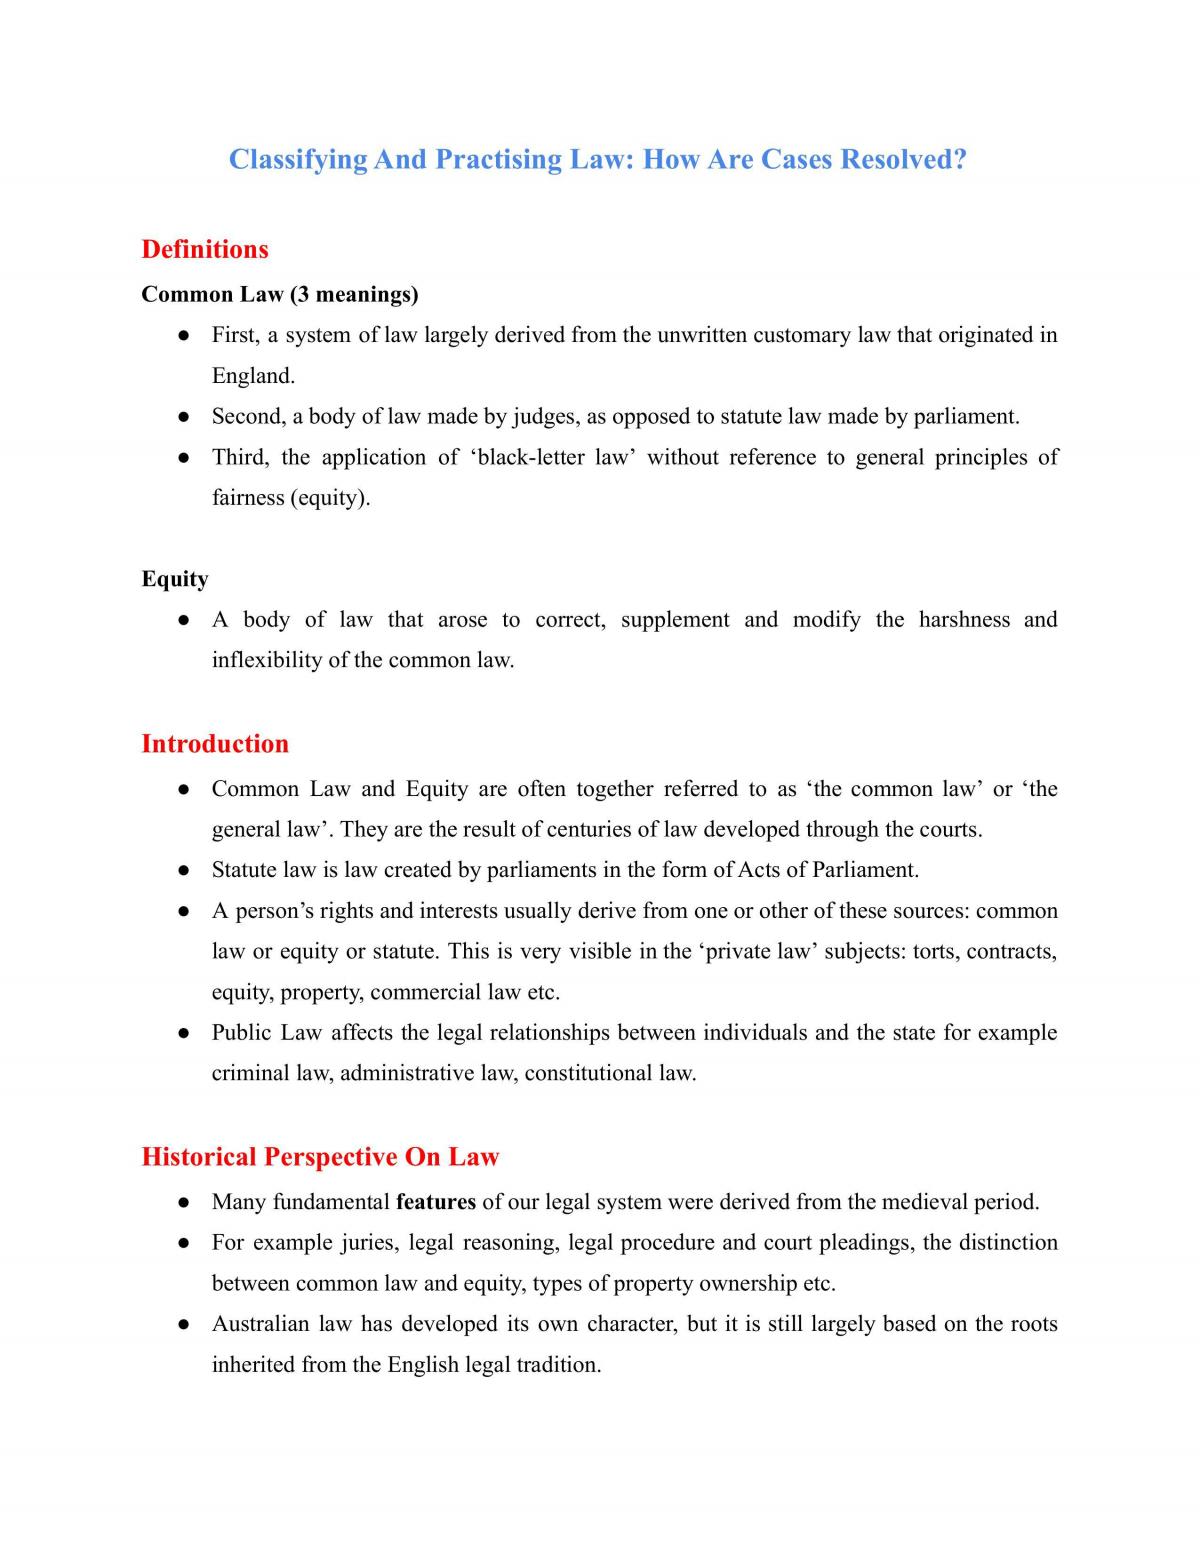 Complete Study Notes For LAWS1000 - Page 2